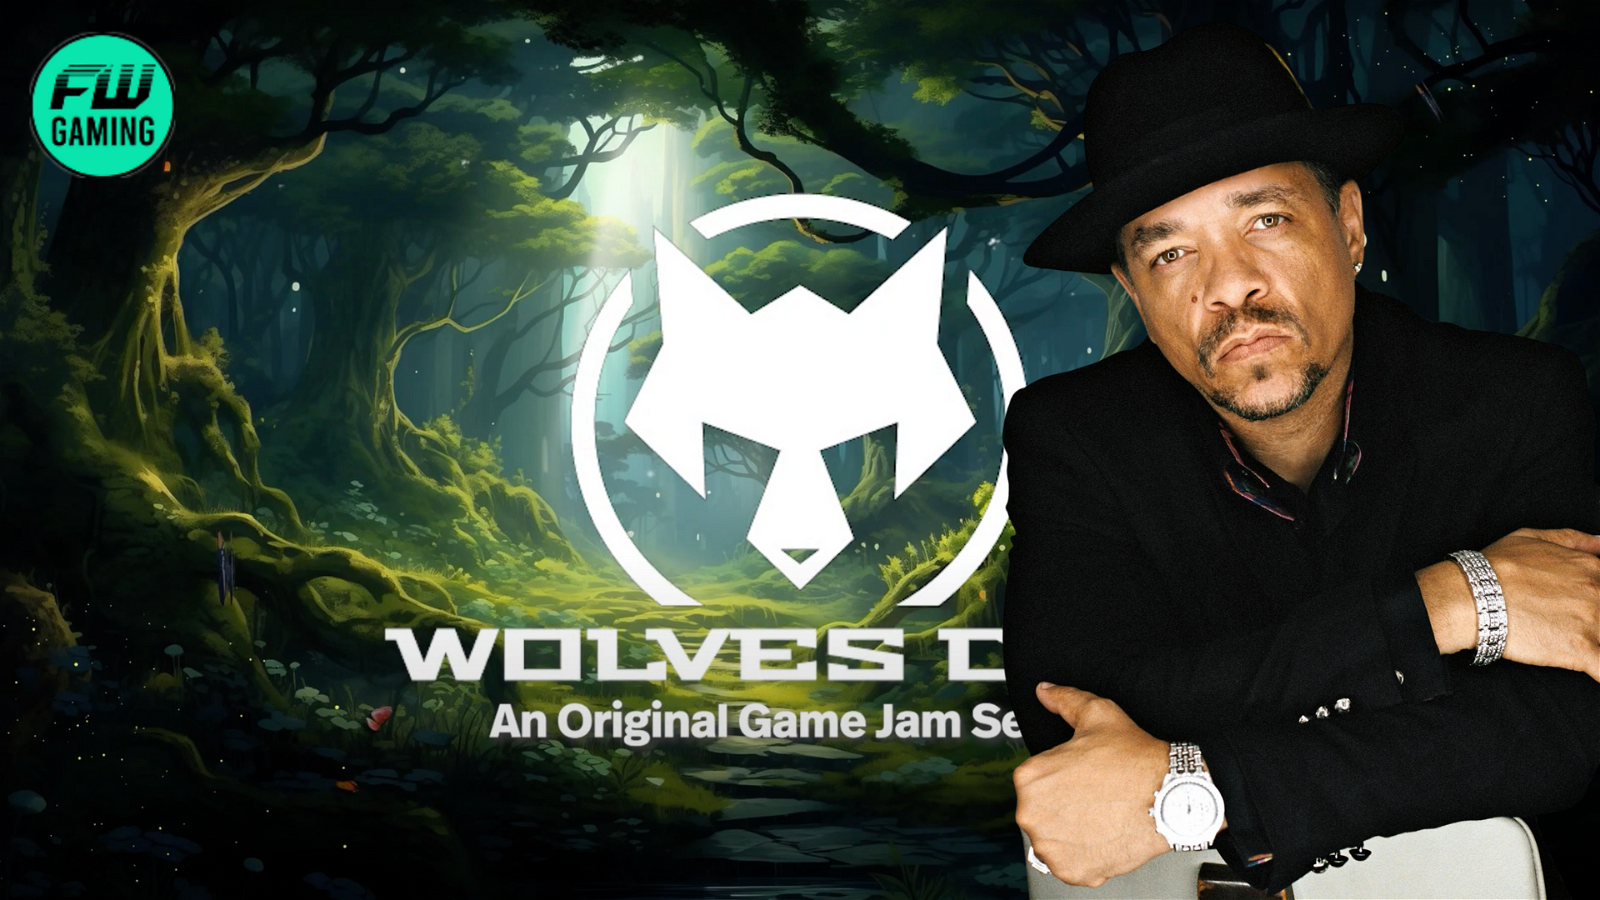 Shark Tank-Inspired ‘Wolves Den’ Announced to Revolutionise Indie Games With Judges Ice T, CliffyB, and Welyn Set to Break the Gaming Industry in Two